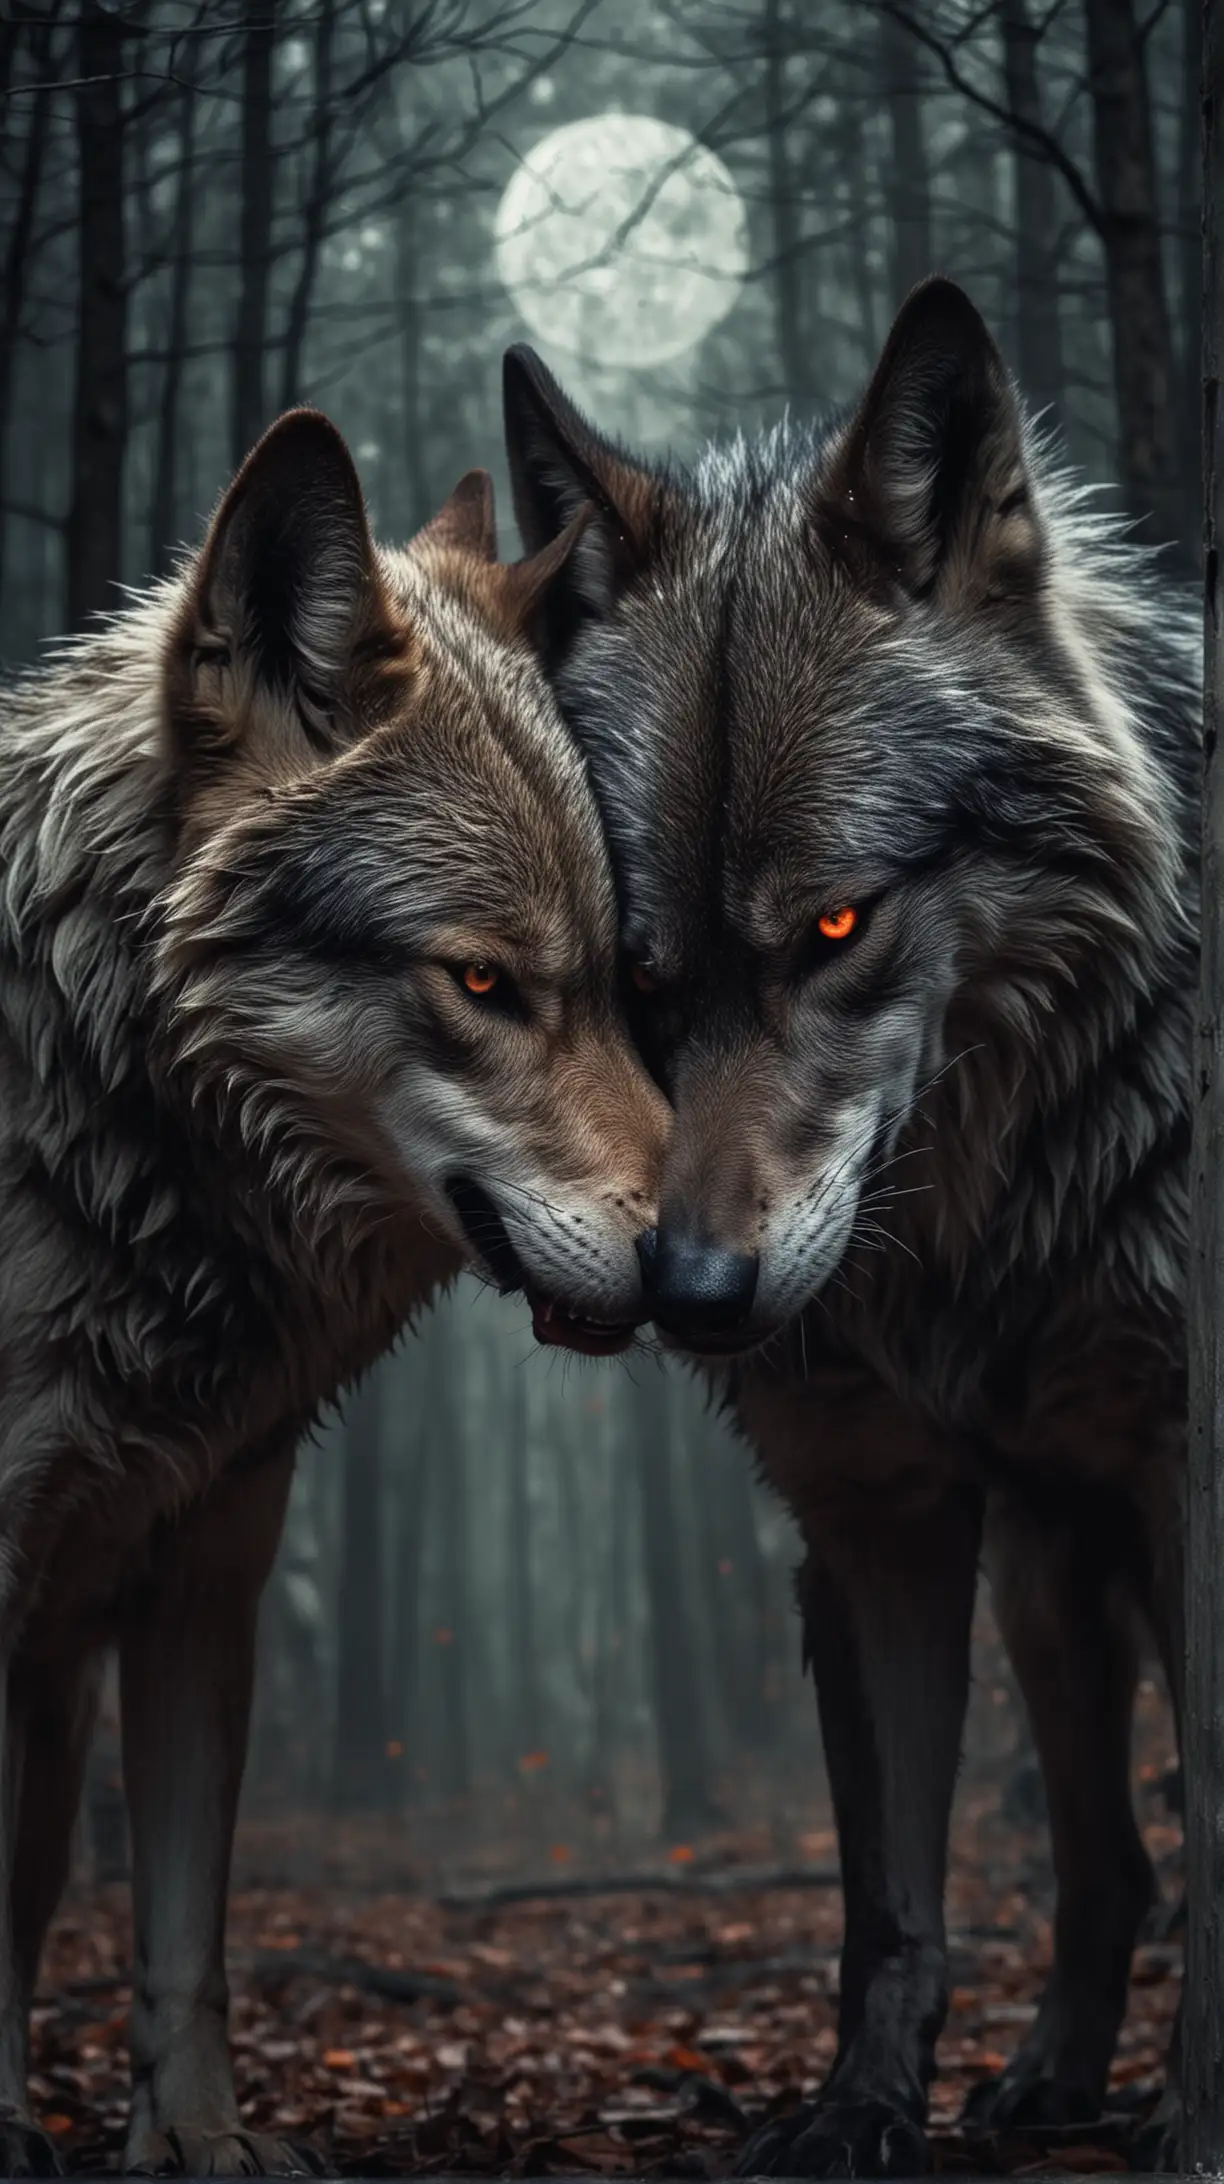 Harmony and Conflict Kind and Evil Wolves Coexisting